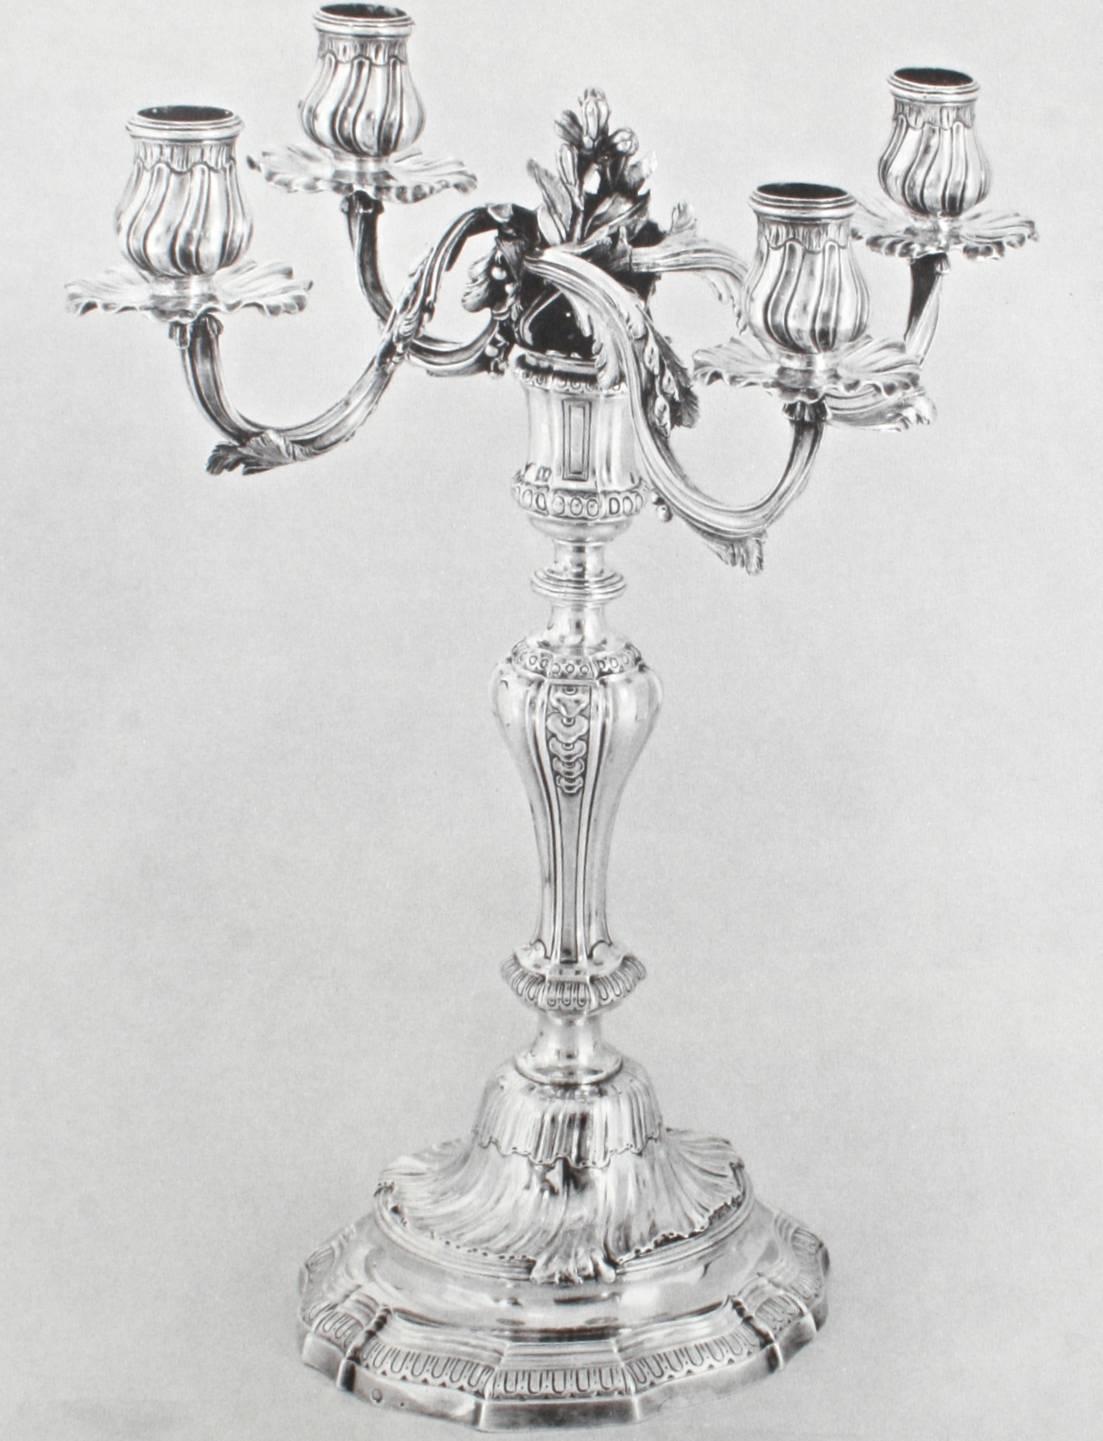 20th Century Met Museum of Art, Three Centuries of French Domestic Silver I & II